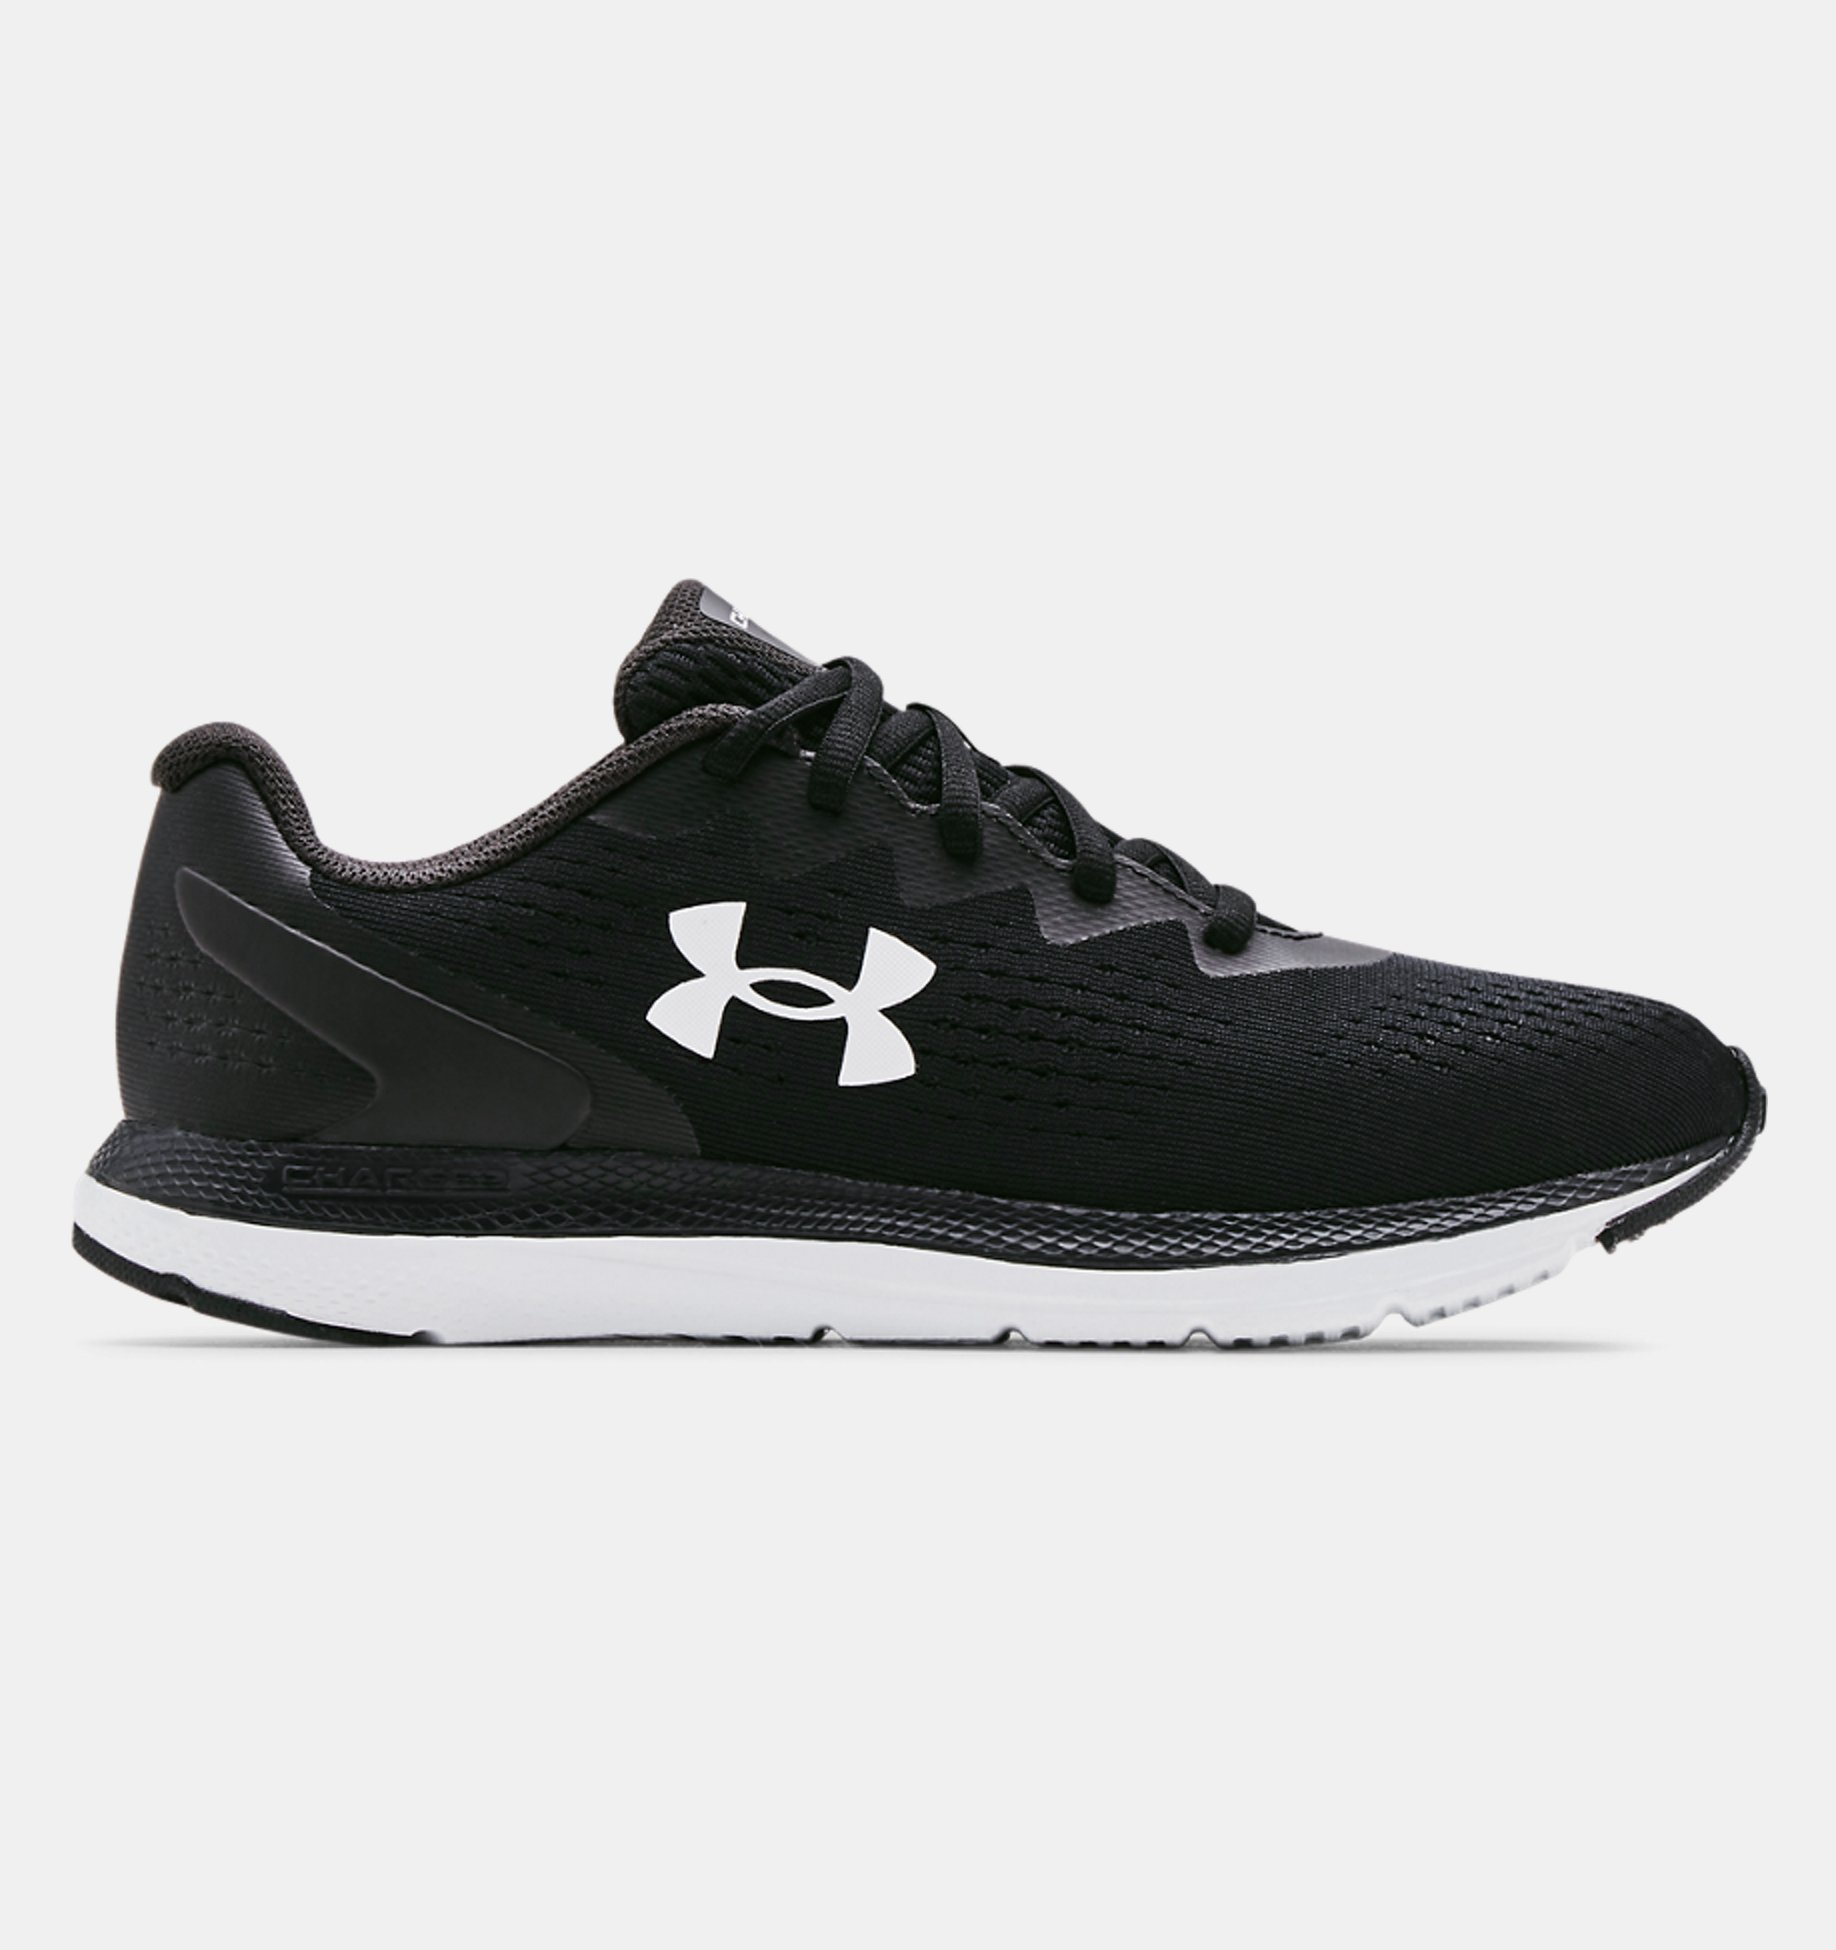 Under Armour Women's Press 2.0 Lightweight Breathable Training Shoes 